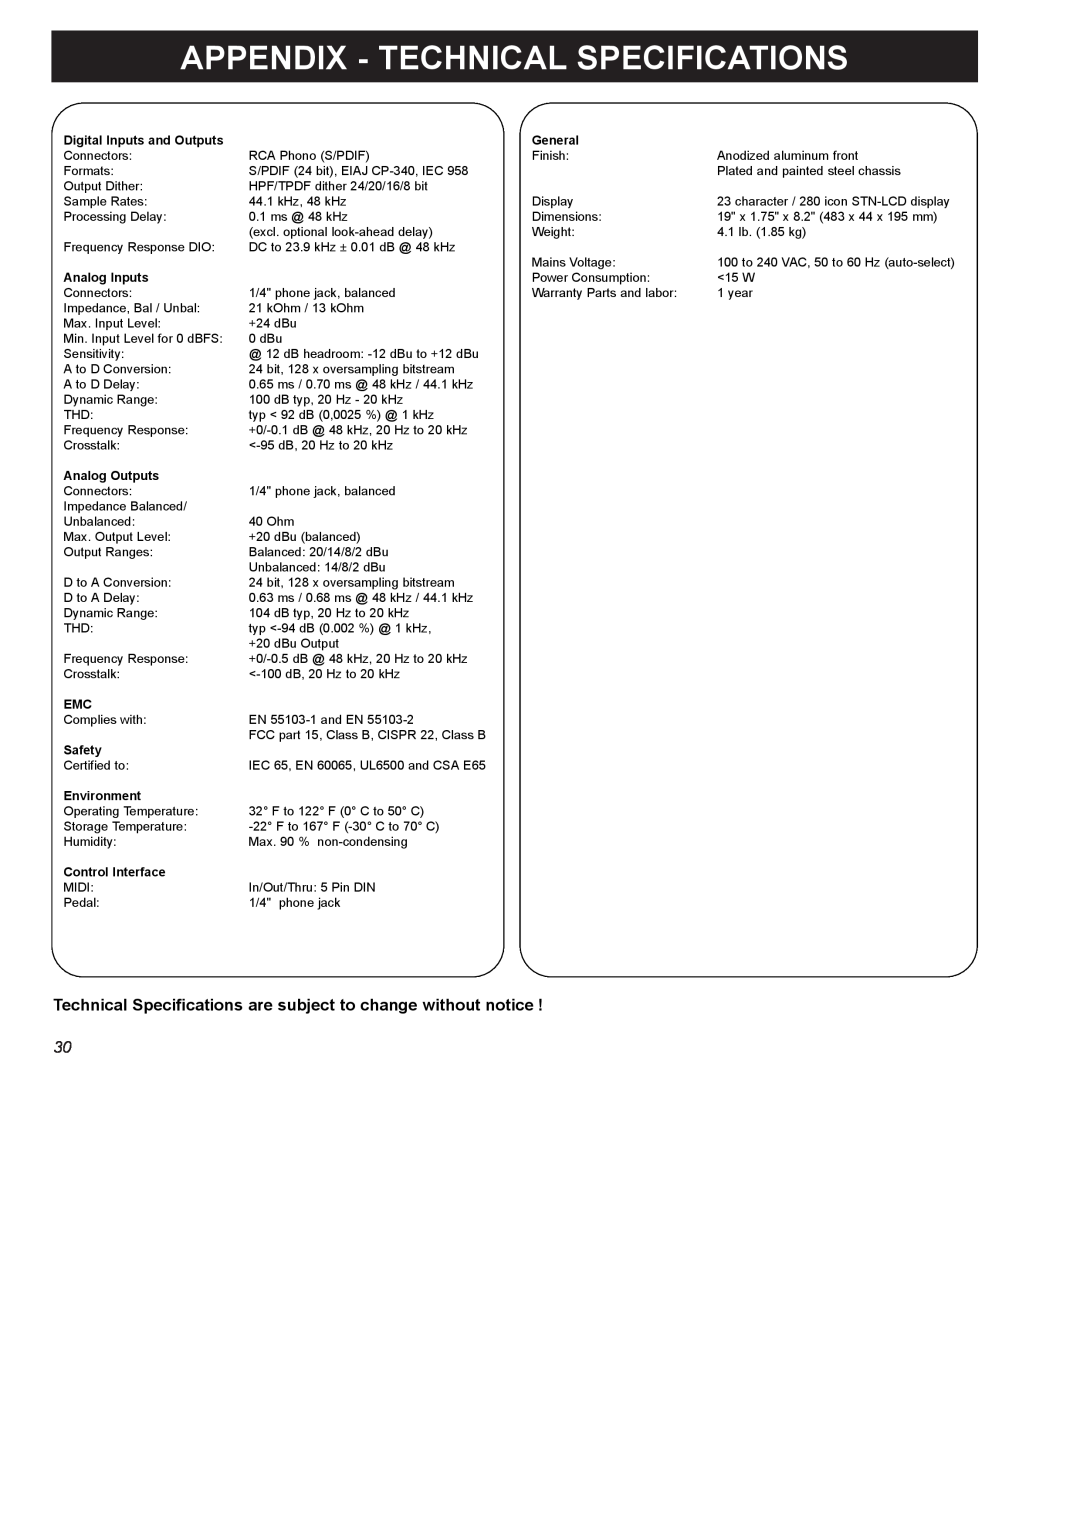 TC electronic SDN BHD SDN BHD Appendix - Technical Specifications, Digital Inputs and Outputs, General, Analog Inputs 